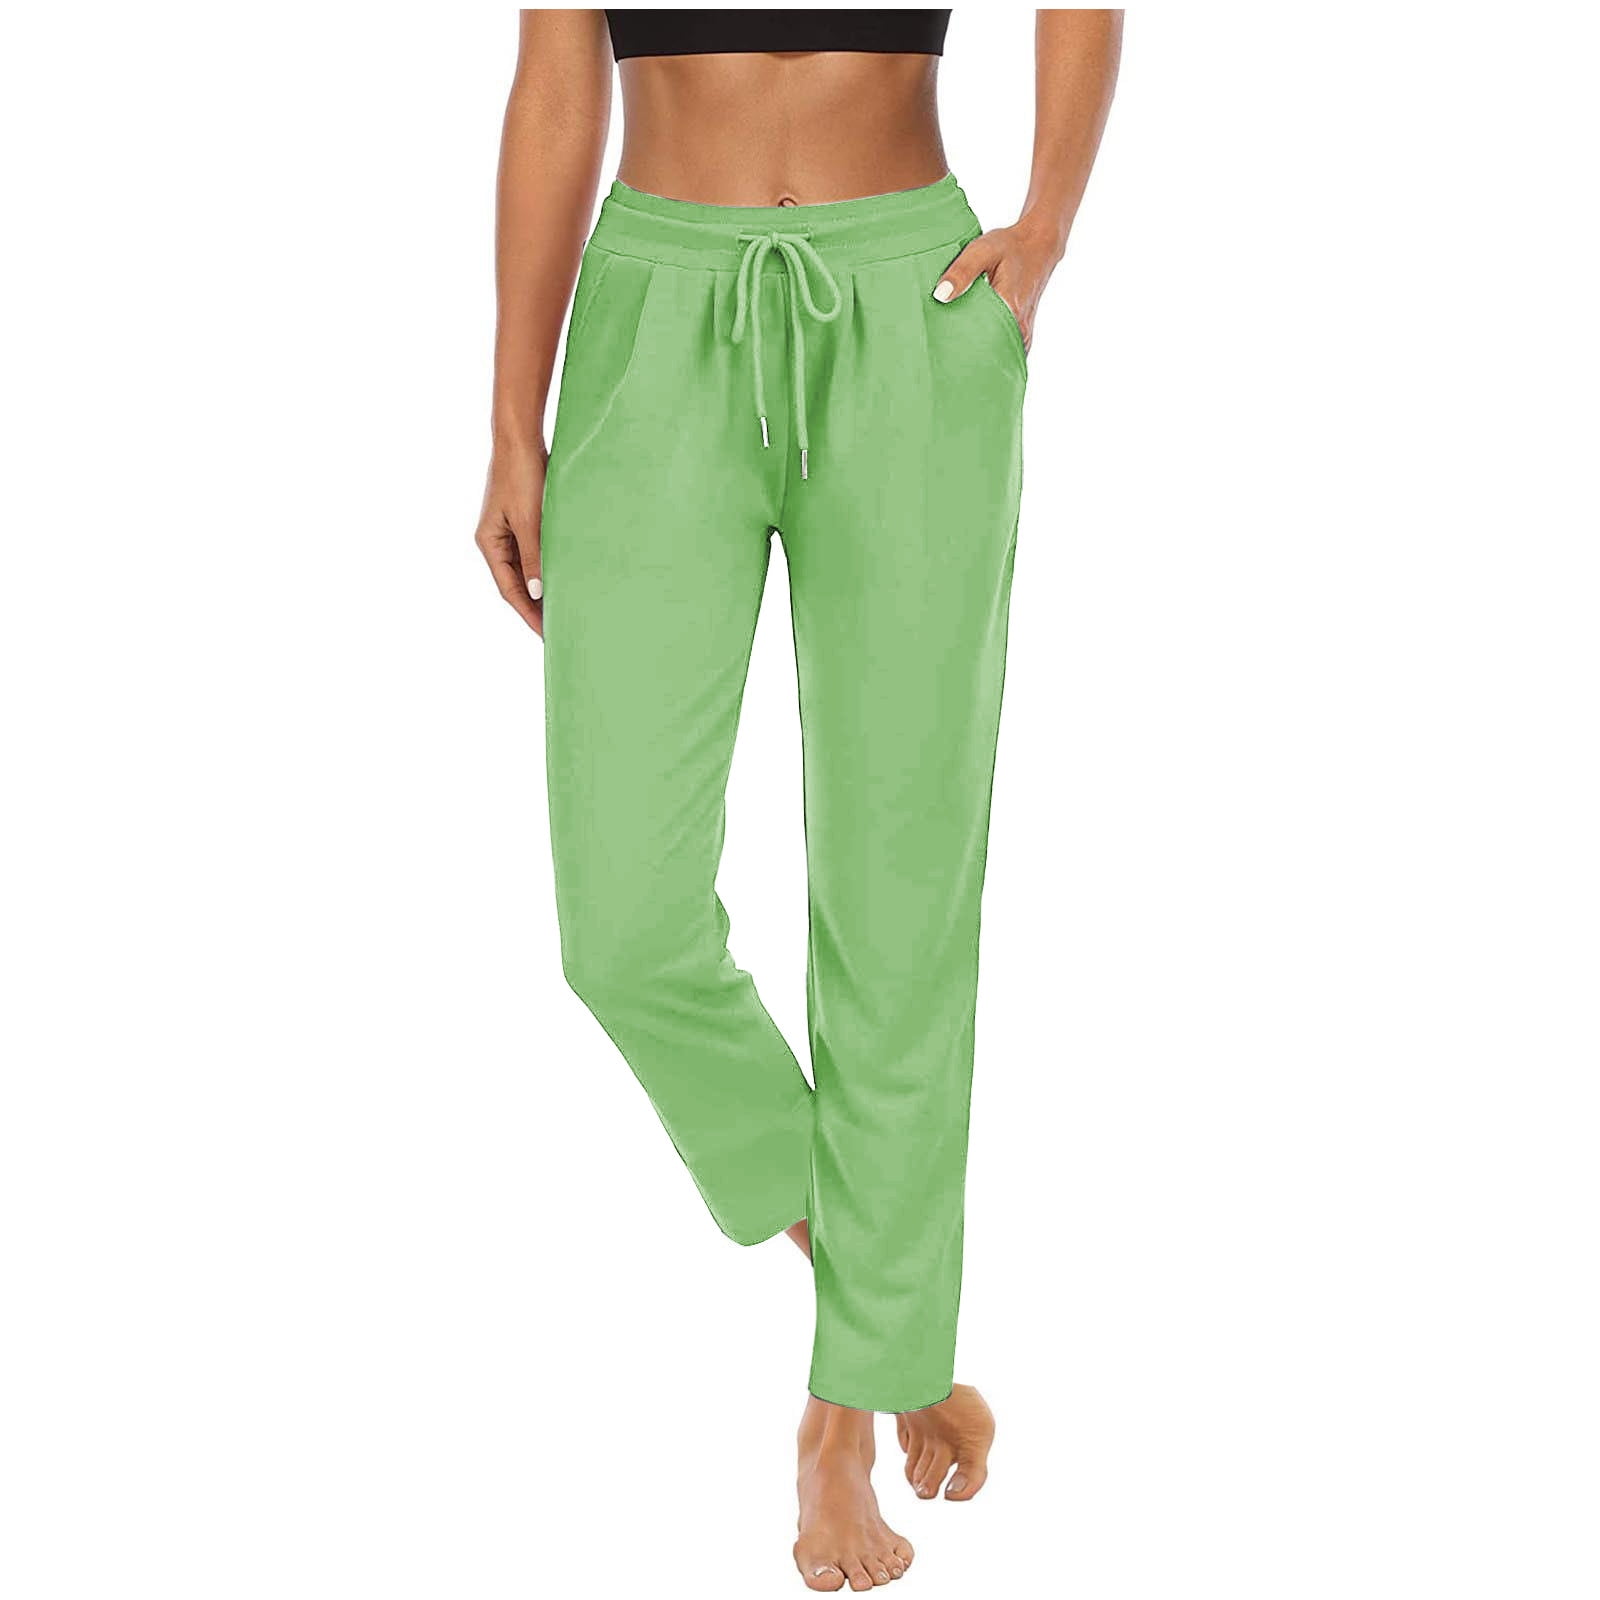 Women's Joggers Pants Lightweight Running Sweatpants with Pockets ...